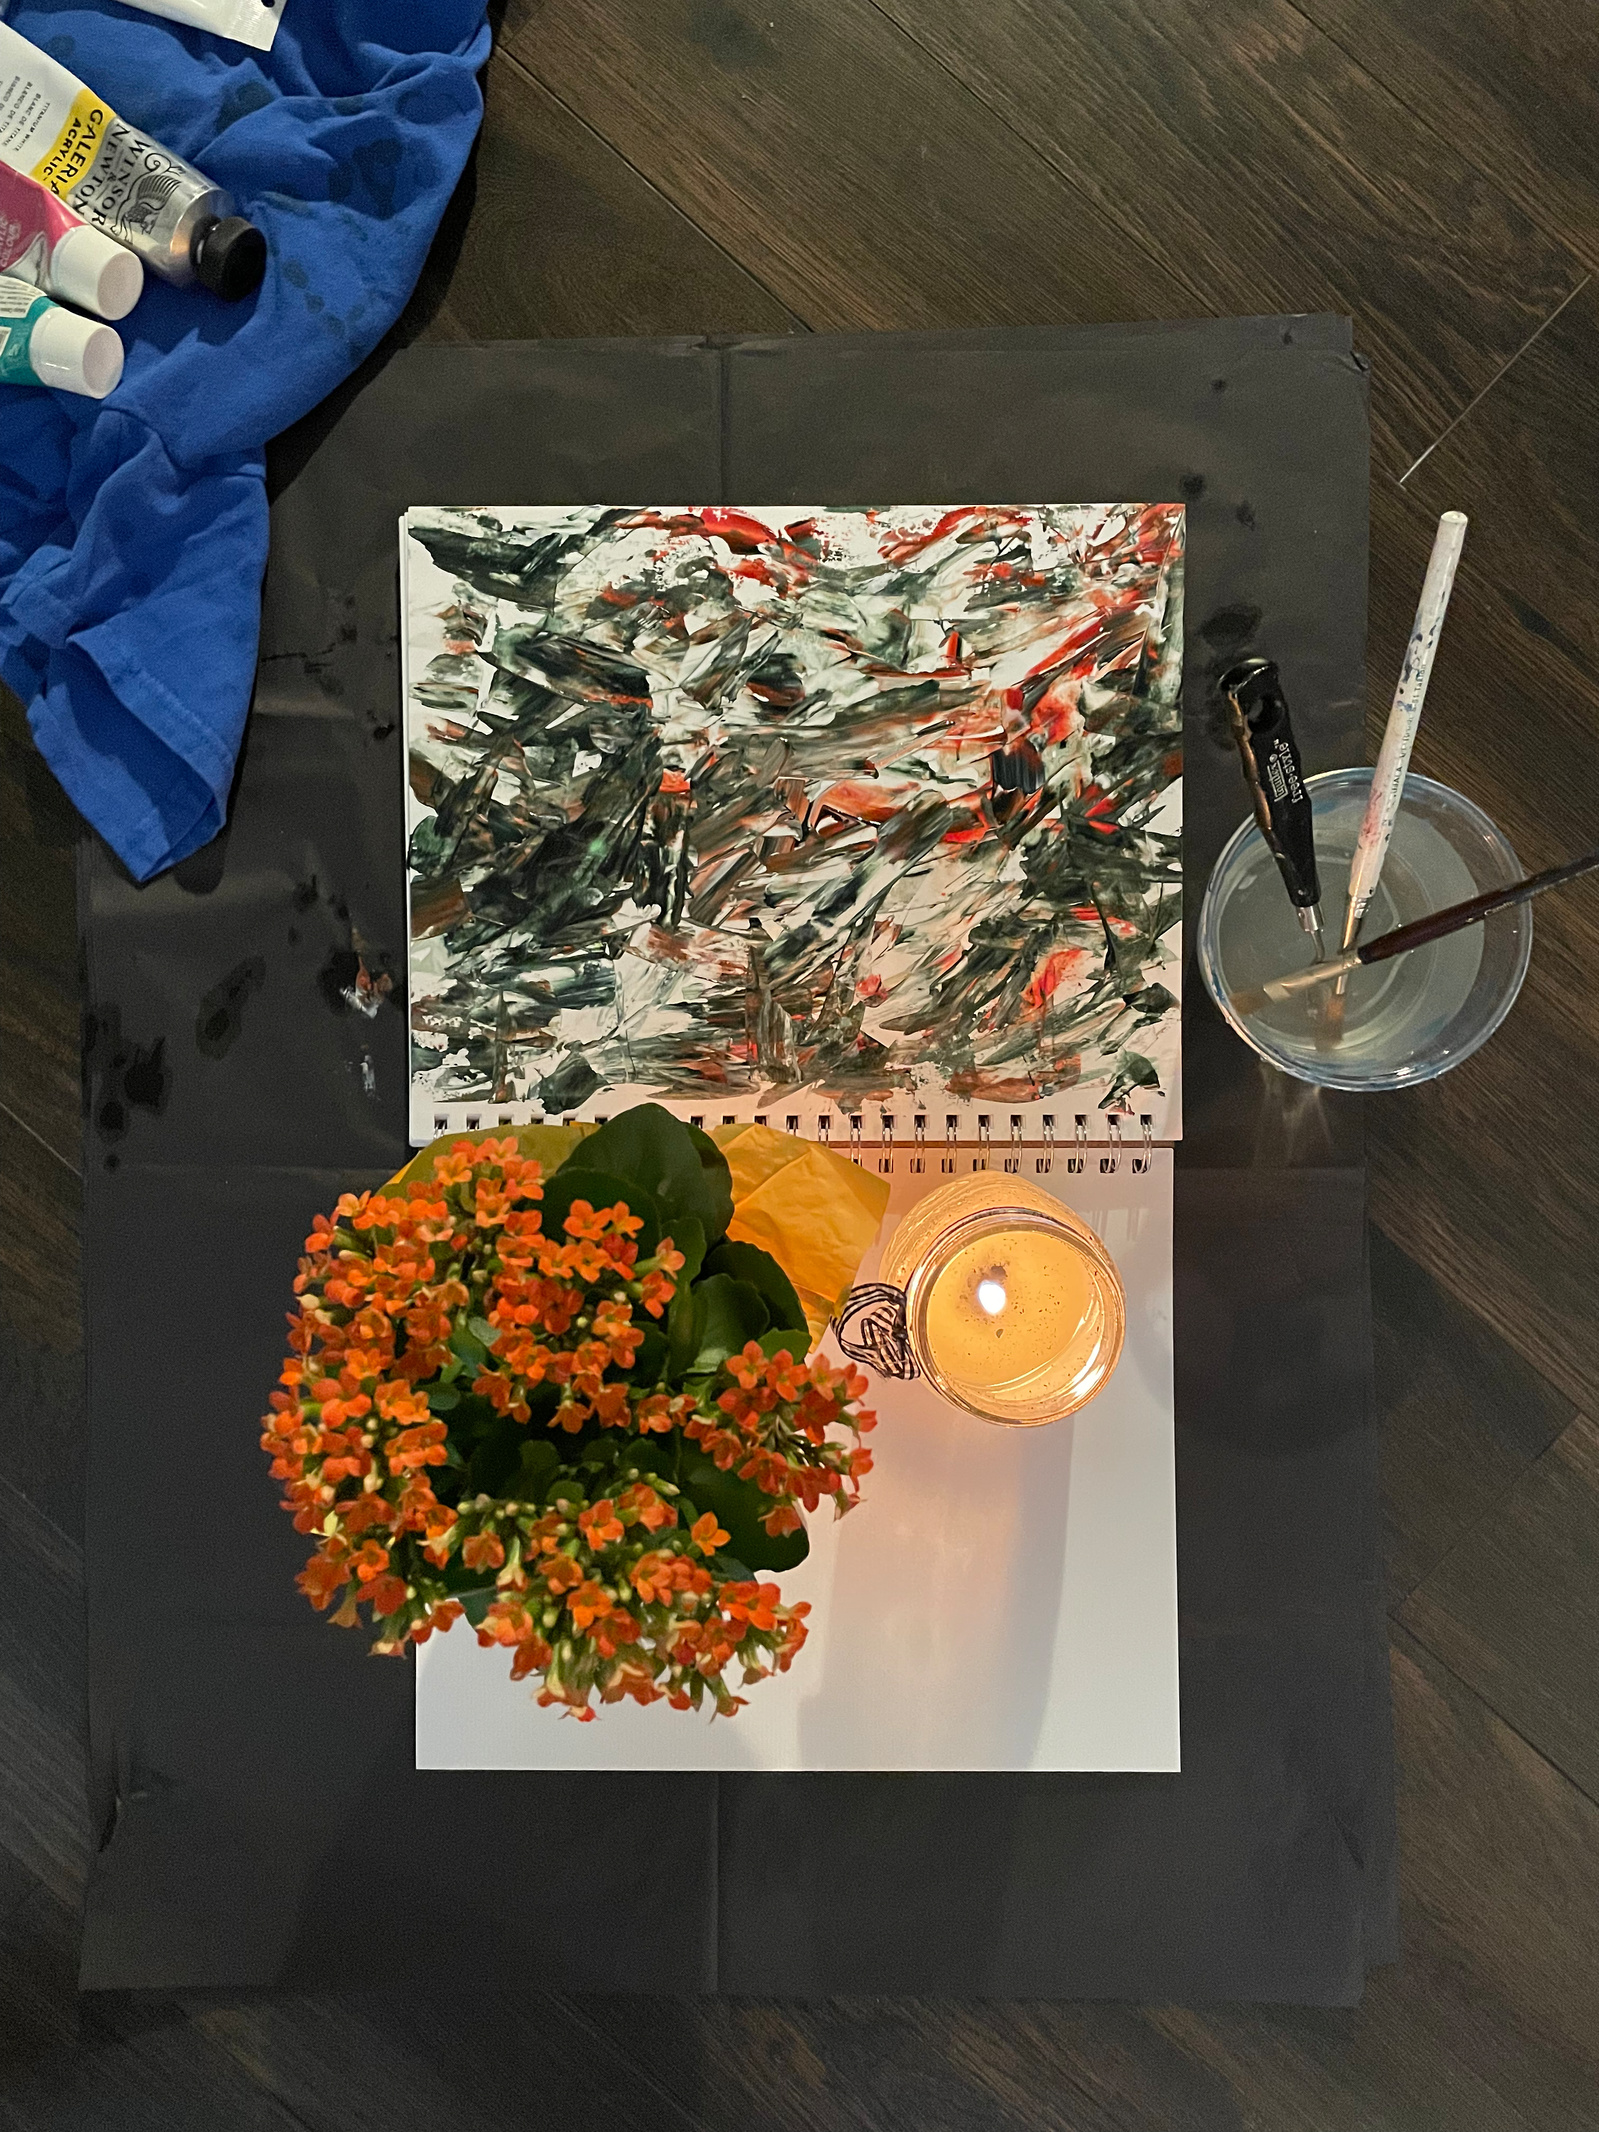 A painting with a candle, a plant with orange flowers and a water bowl with brushes on the side, ready for the camera.